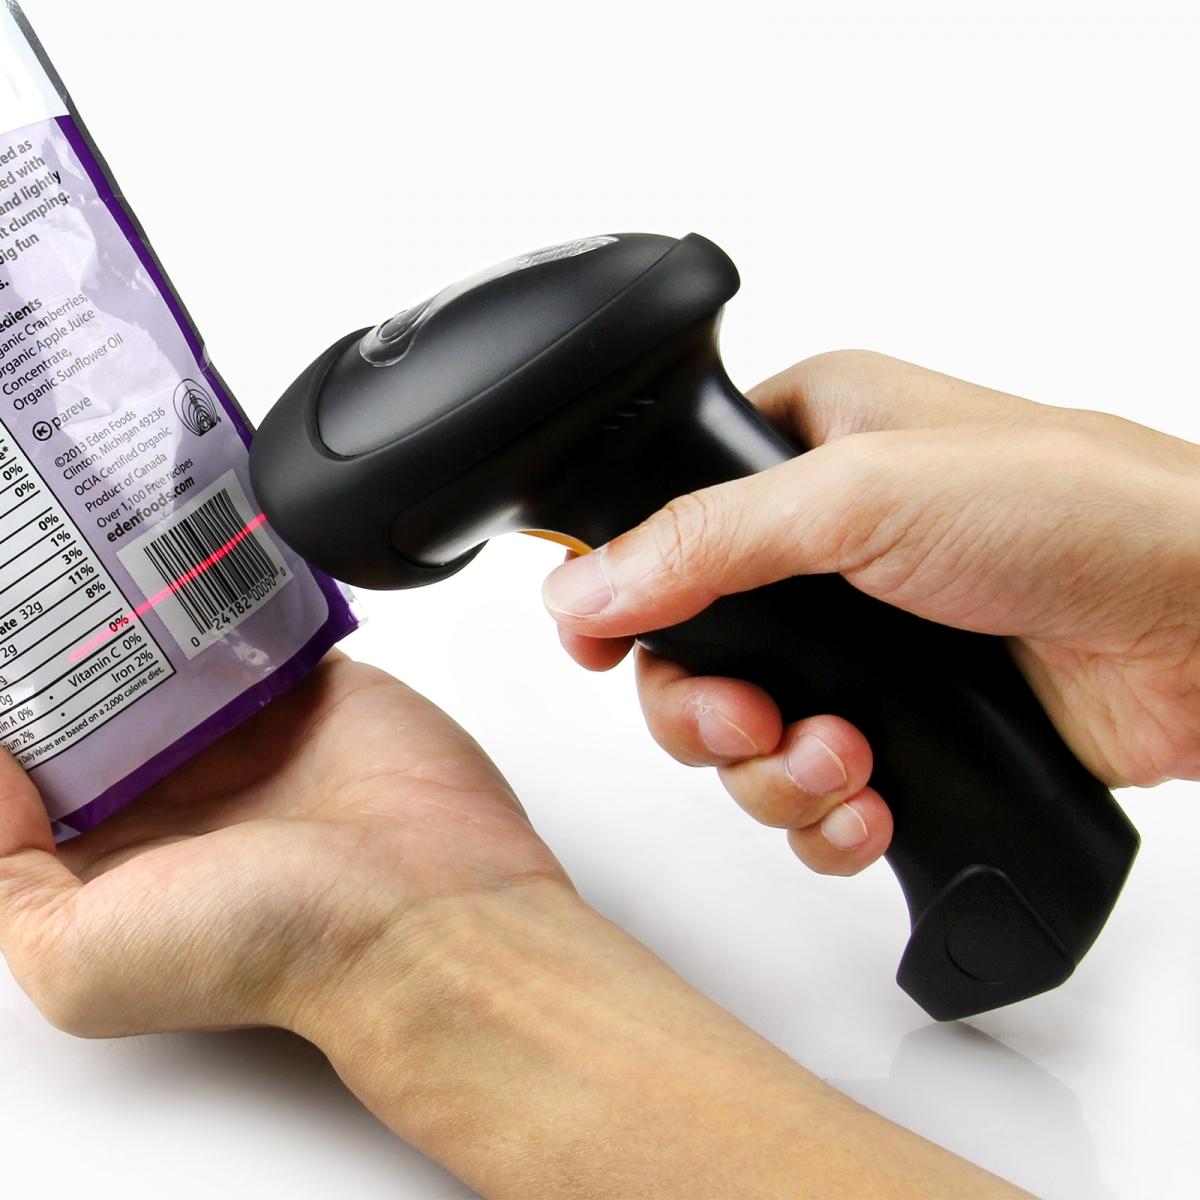 wireless handheld scanners for barcodes